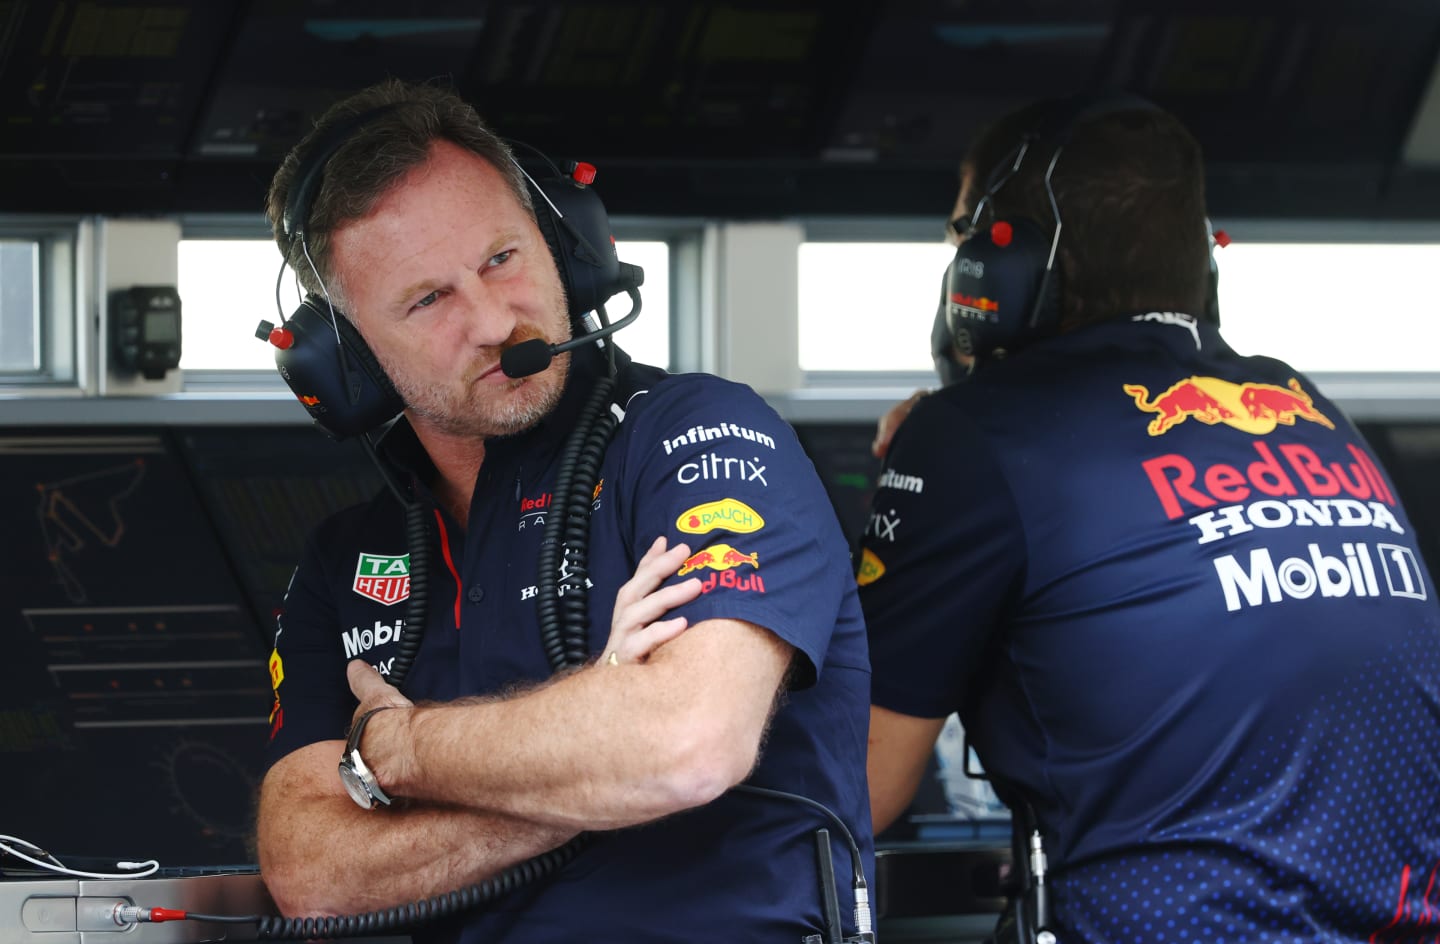 ABU DHABI, UNITED ARAB EMIRATES - DECEMBER 10: Red Bull Racing Team Principal Christian Horner looks on from the pitwall during practice ahead of the F1 Grand Prix of Abu Dhabi at Yas Marina Circuit on December 10, 2021 in Abu Dhabi, United Arab Emirates. (Photo by Clive Rose/Getty Images)